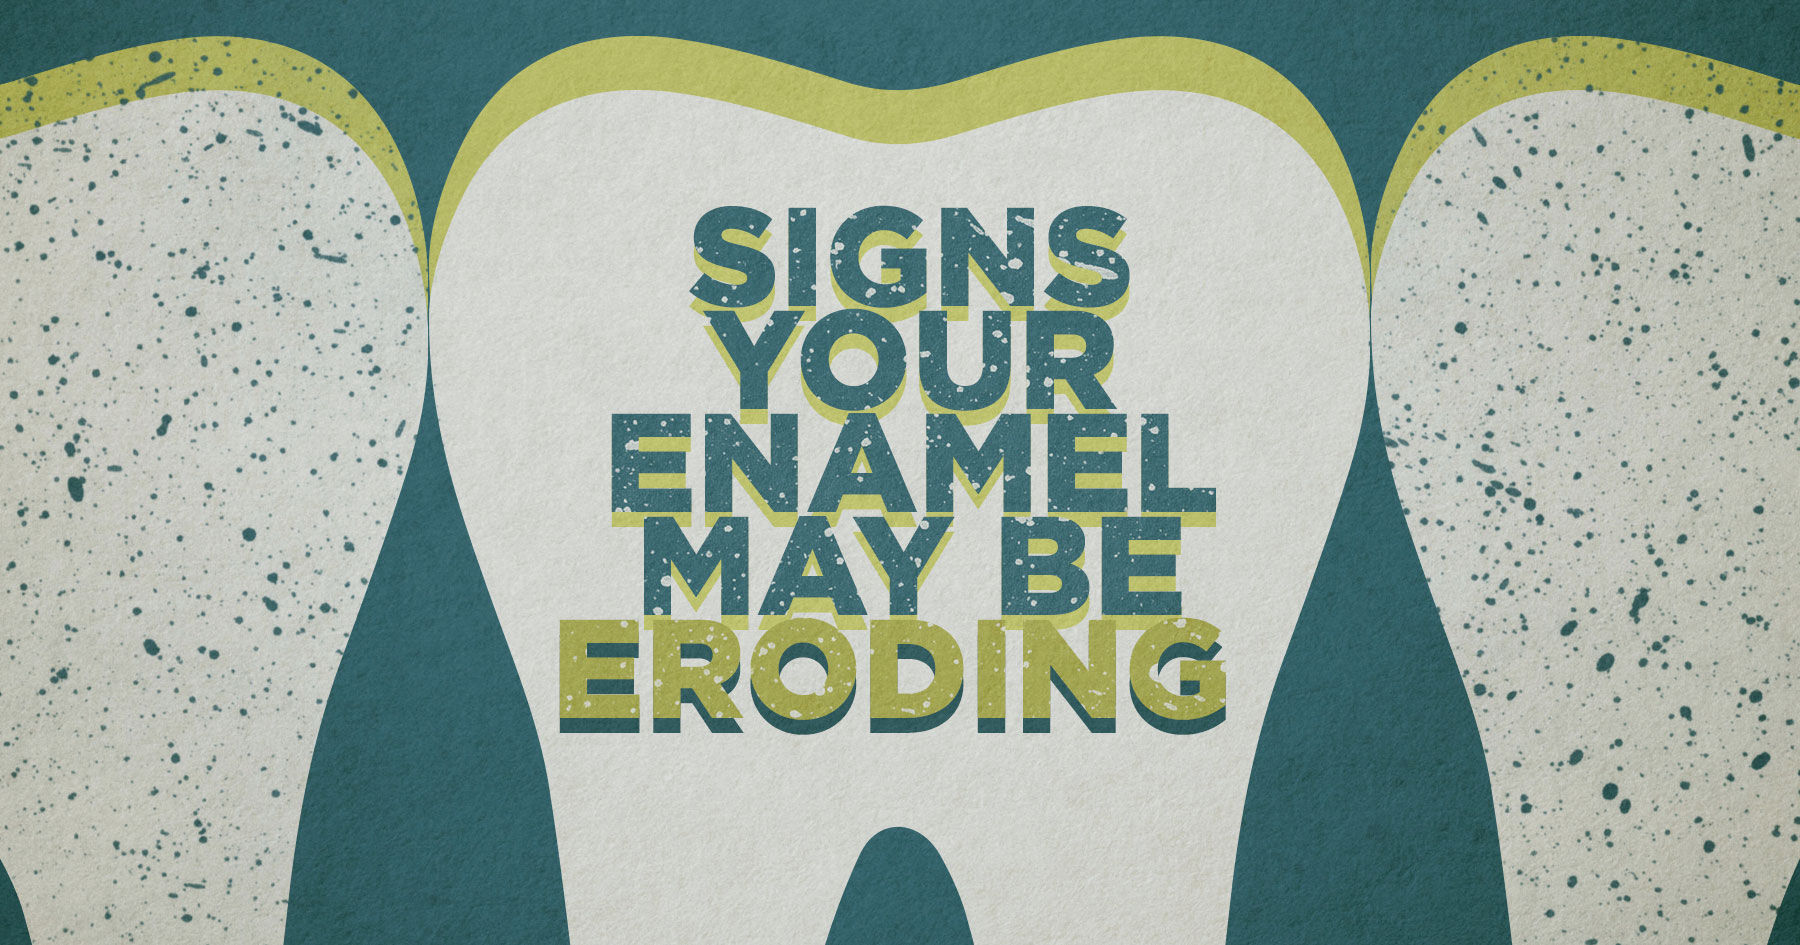 Text in image: Signs your enamel may be eroding